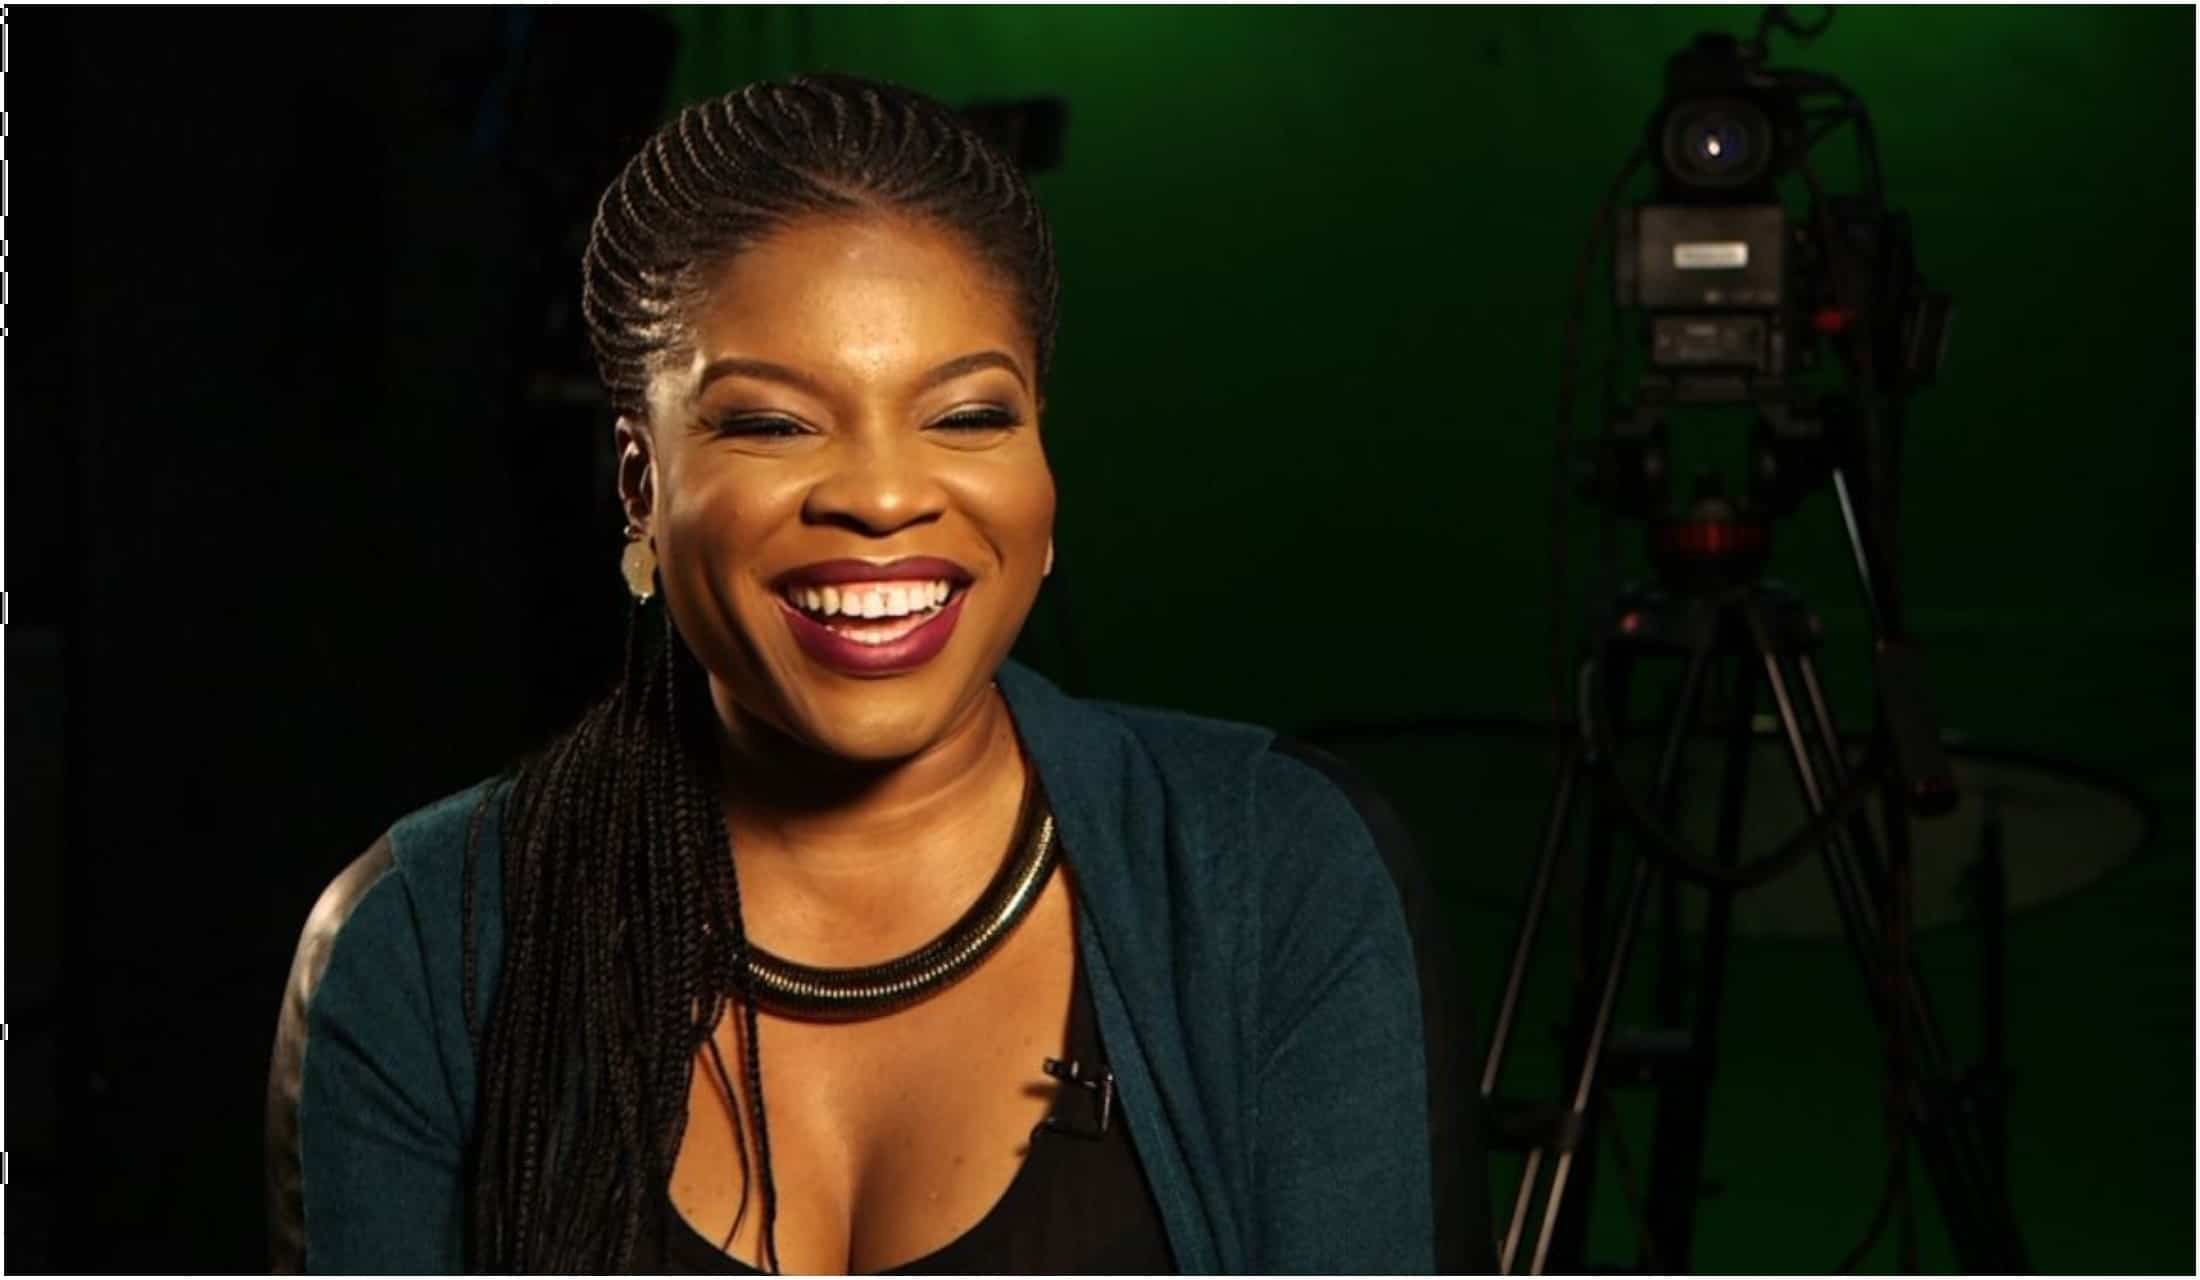 Despite her directorial debut, ‘The Wedding Party’, being a comedy grosser, Kemi Adetiba bucked the trends and turned the tides on her sophomore project. [Image Credit: Kemi Filani News]